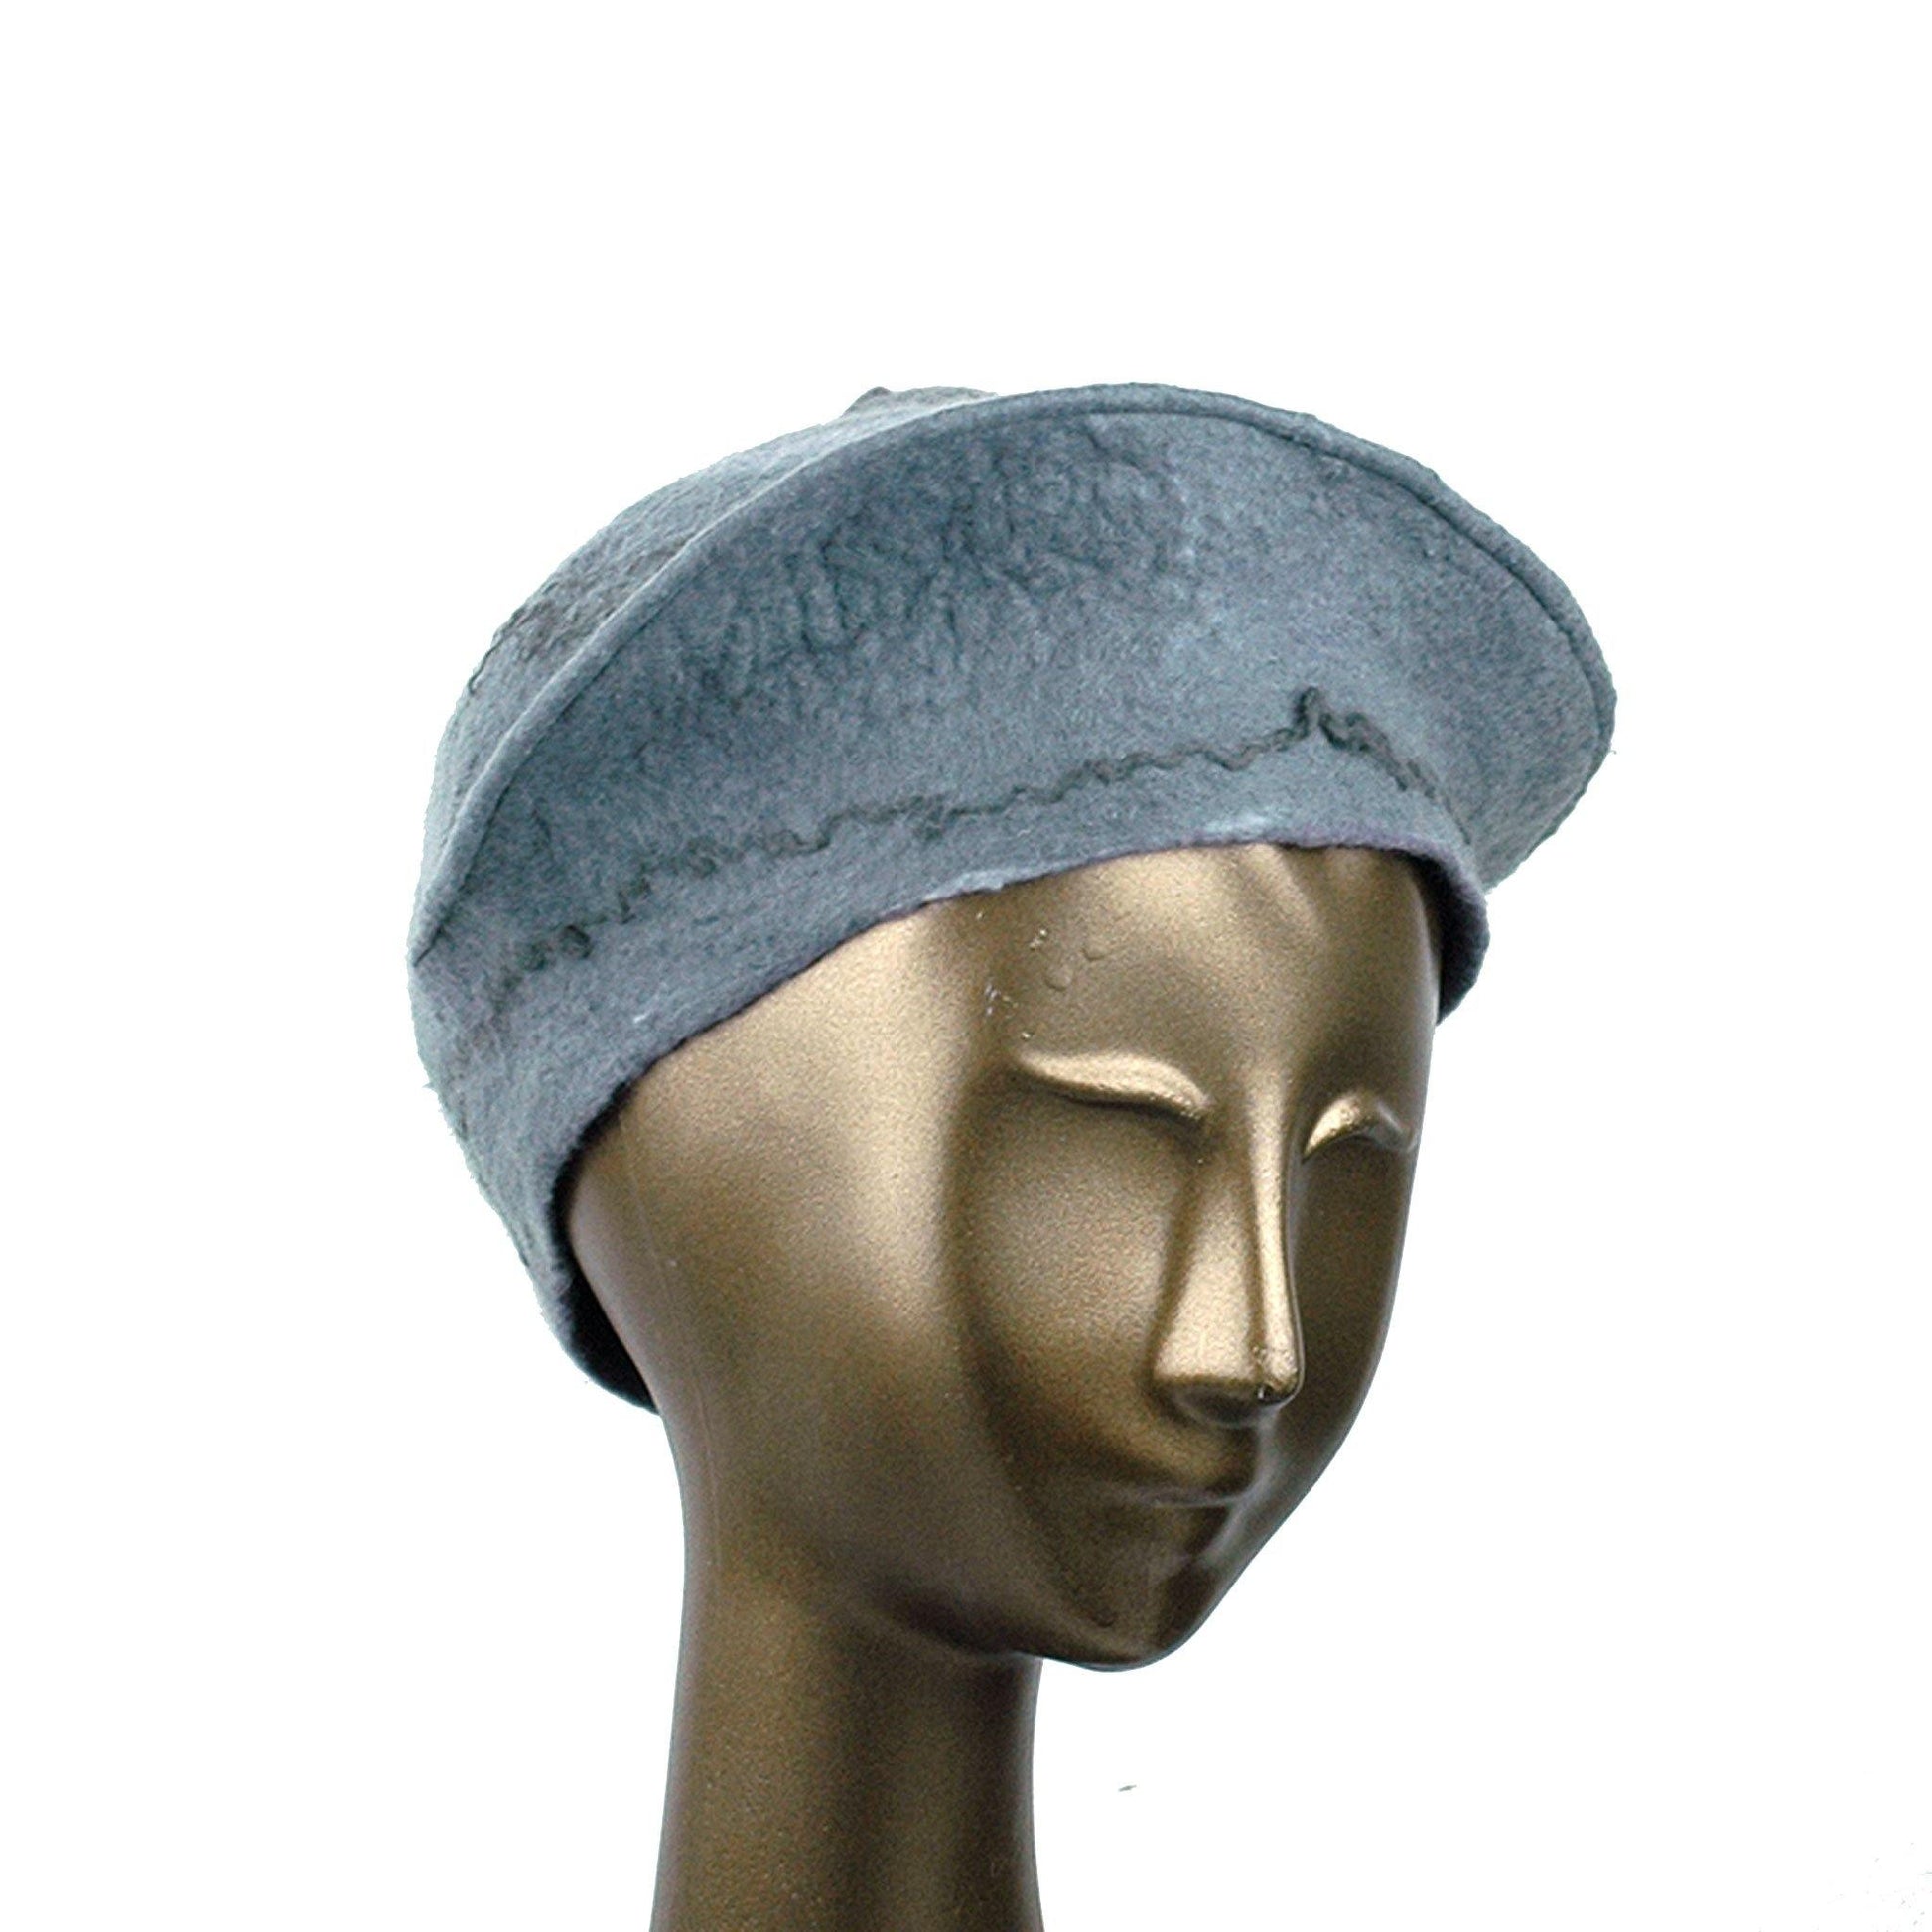 Gray Felted Beret with Crater on Top - three quarters view